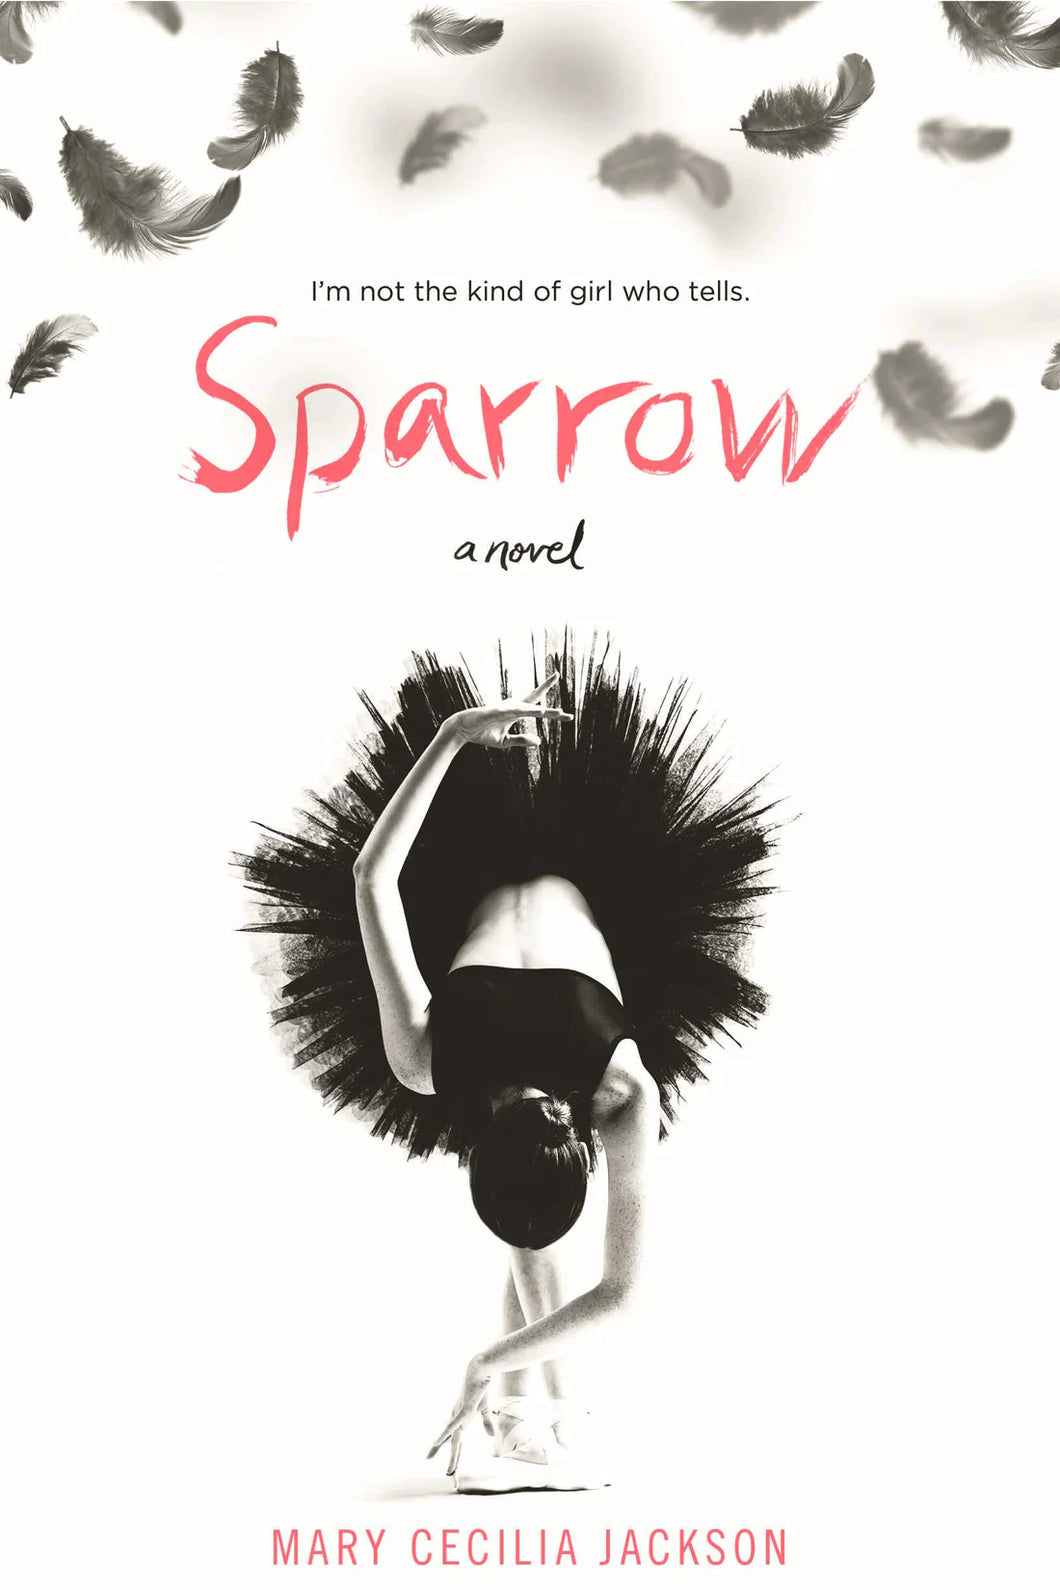 Sparrow by Mary Cecilia Jackson / Paperback - NEW BOOK